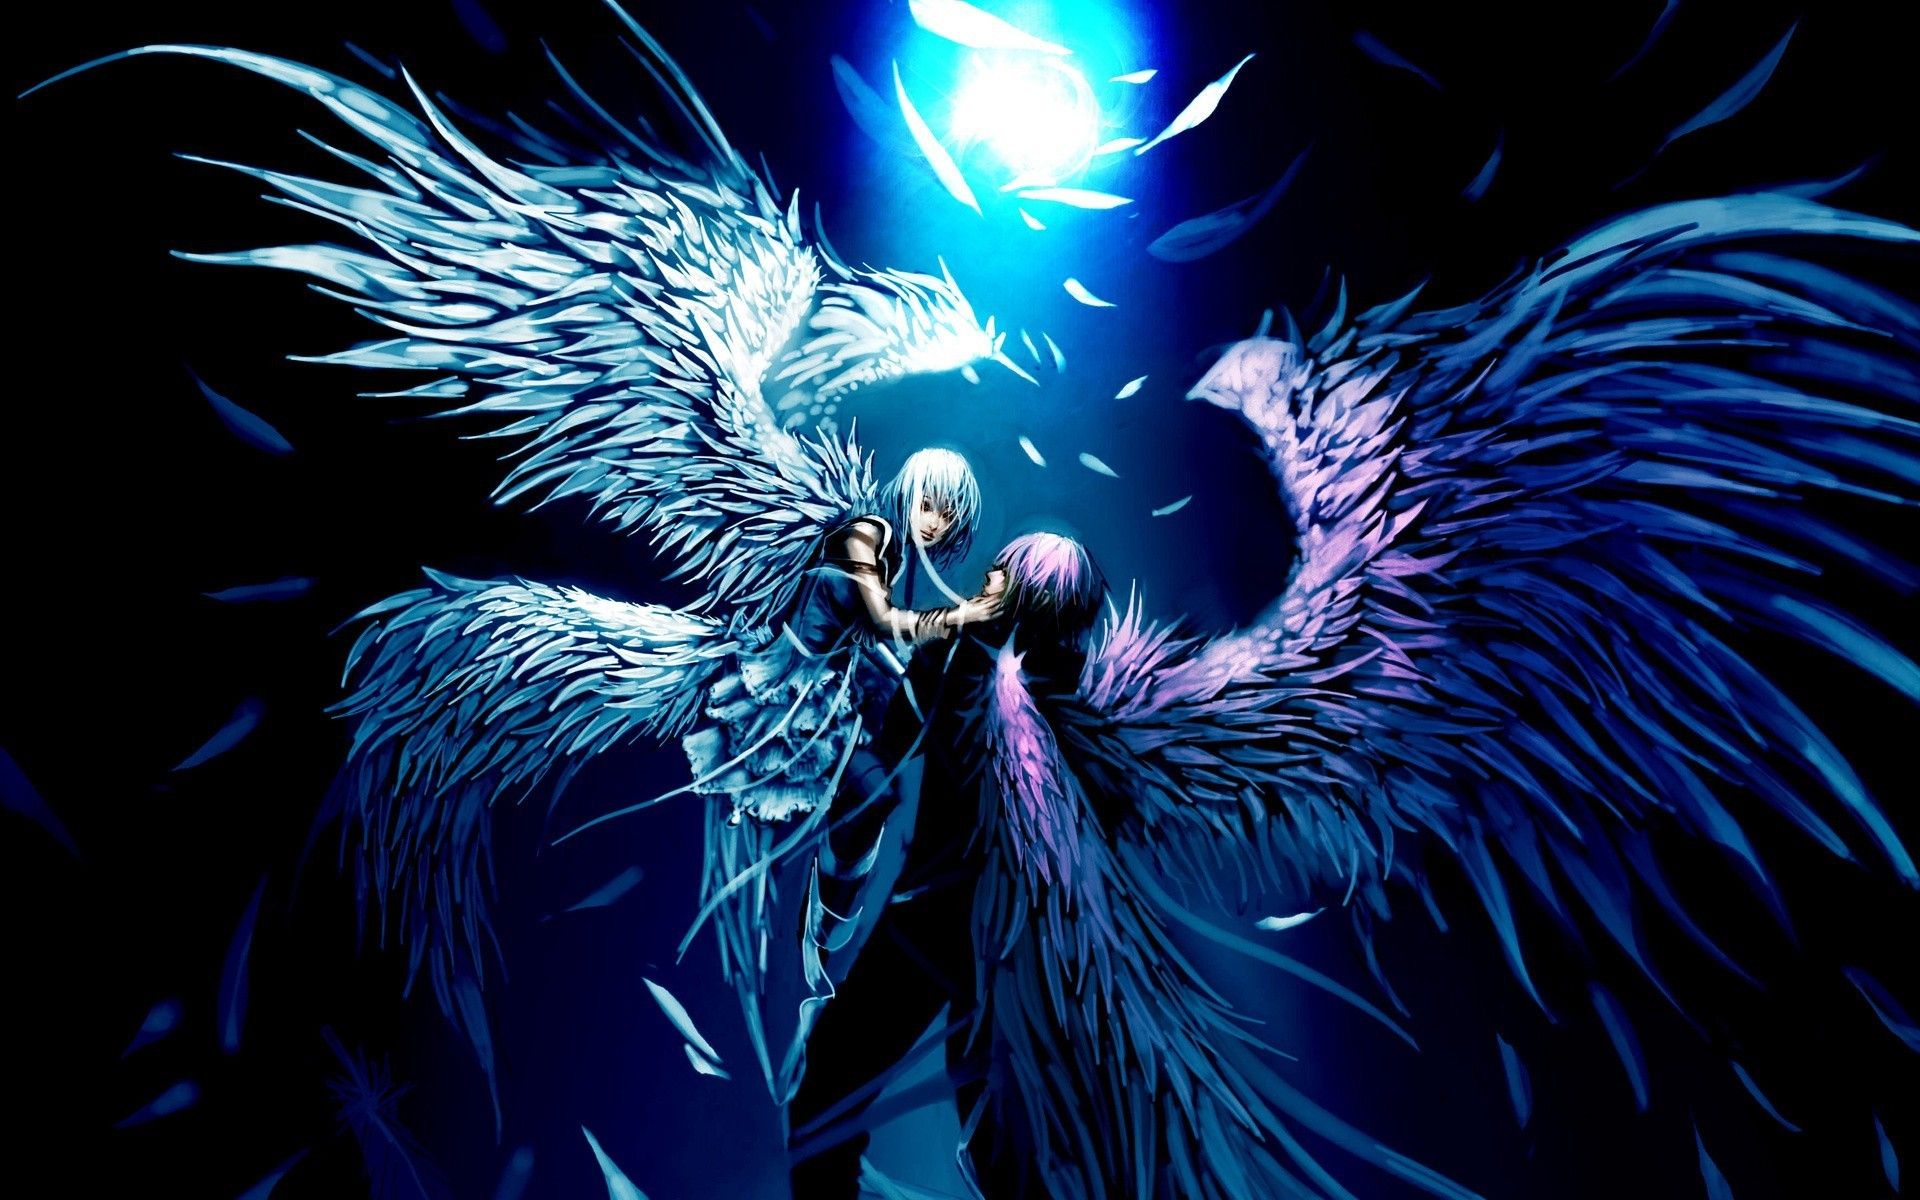 Mobile wallpaper: Anime, Angel, 1344381 download the picture for free.